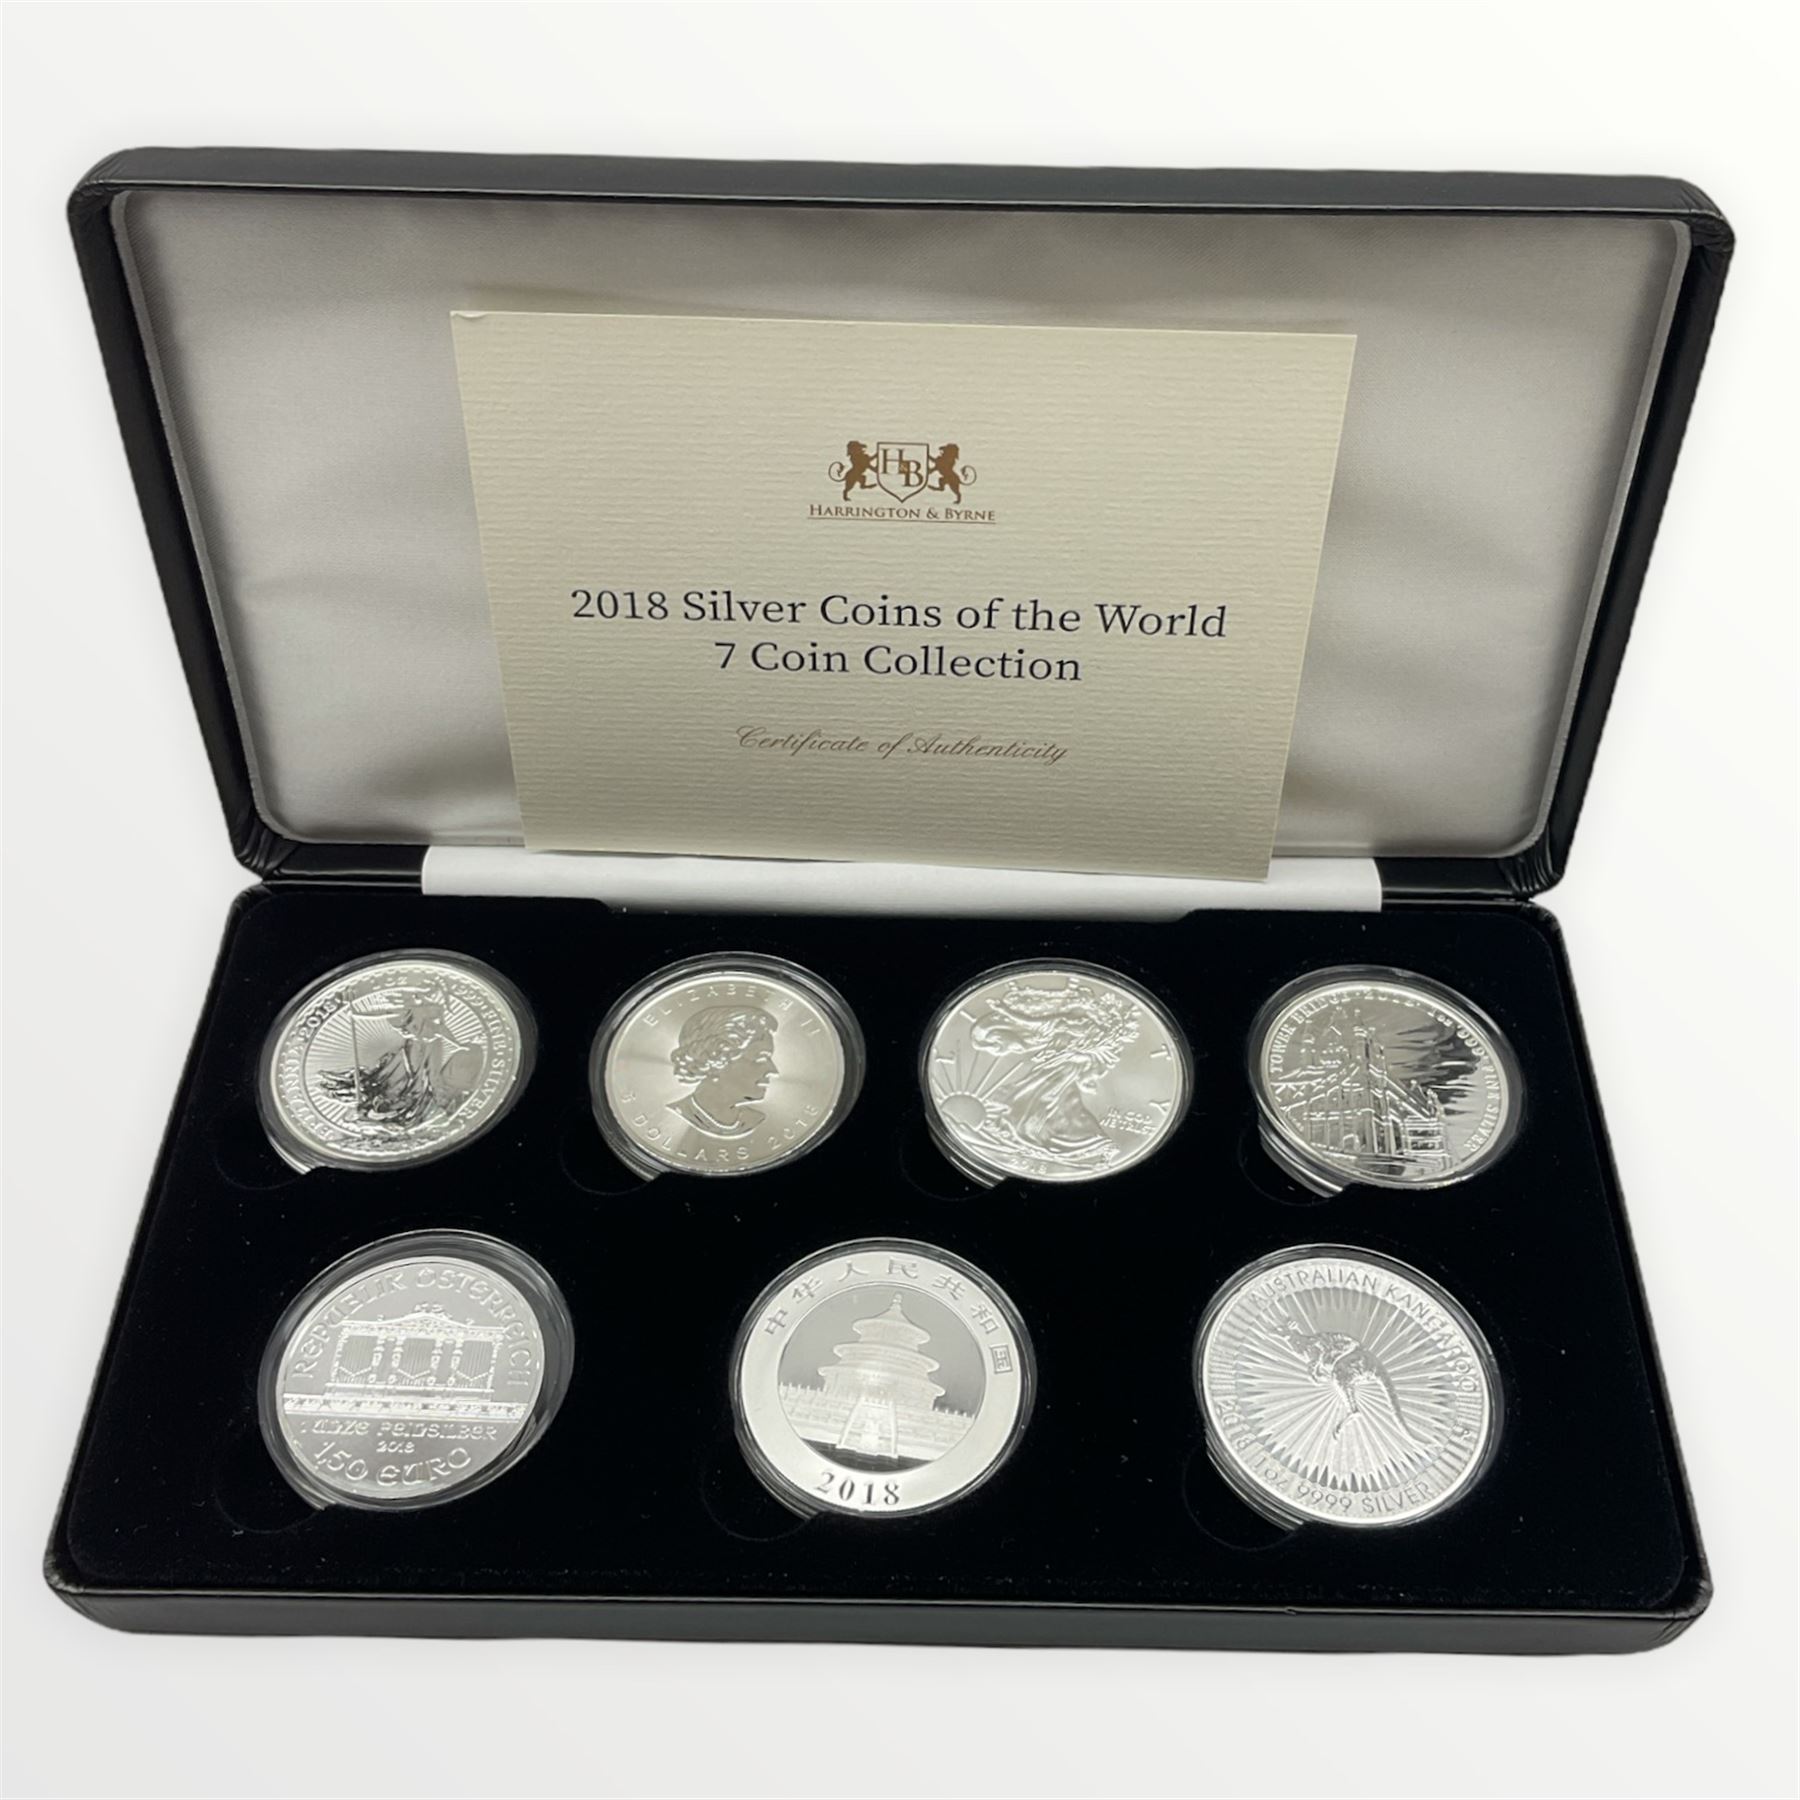 '2018 Silver Coins of the World 7 coin Collection' comprising seven silver coins all dated 2018